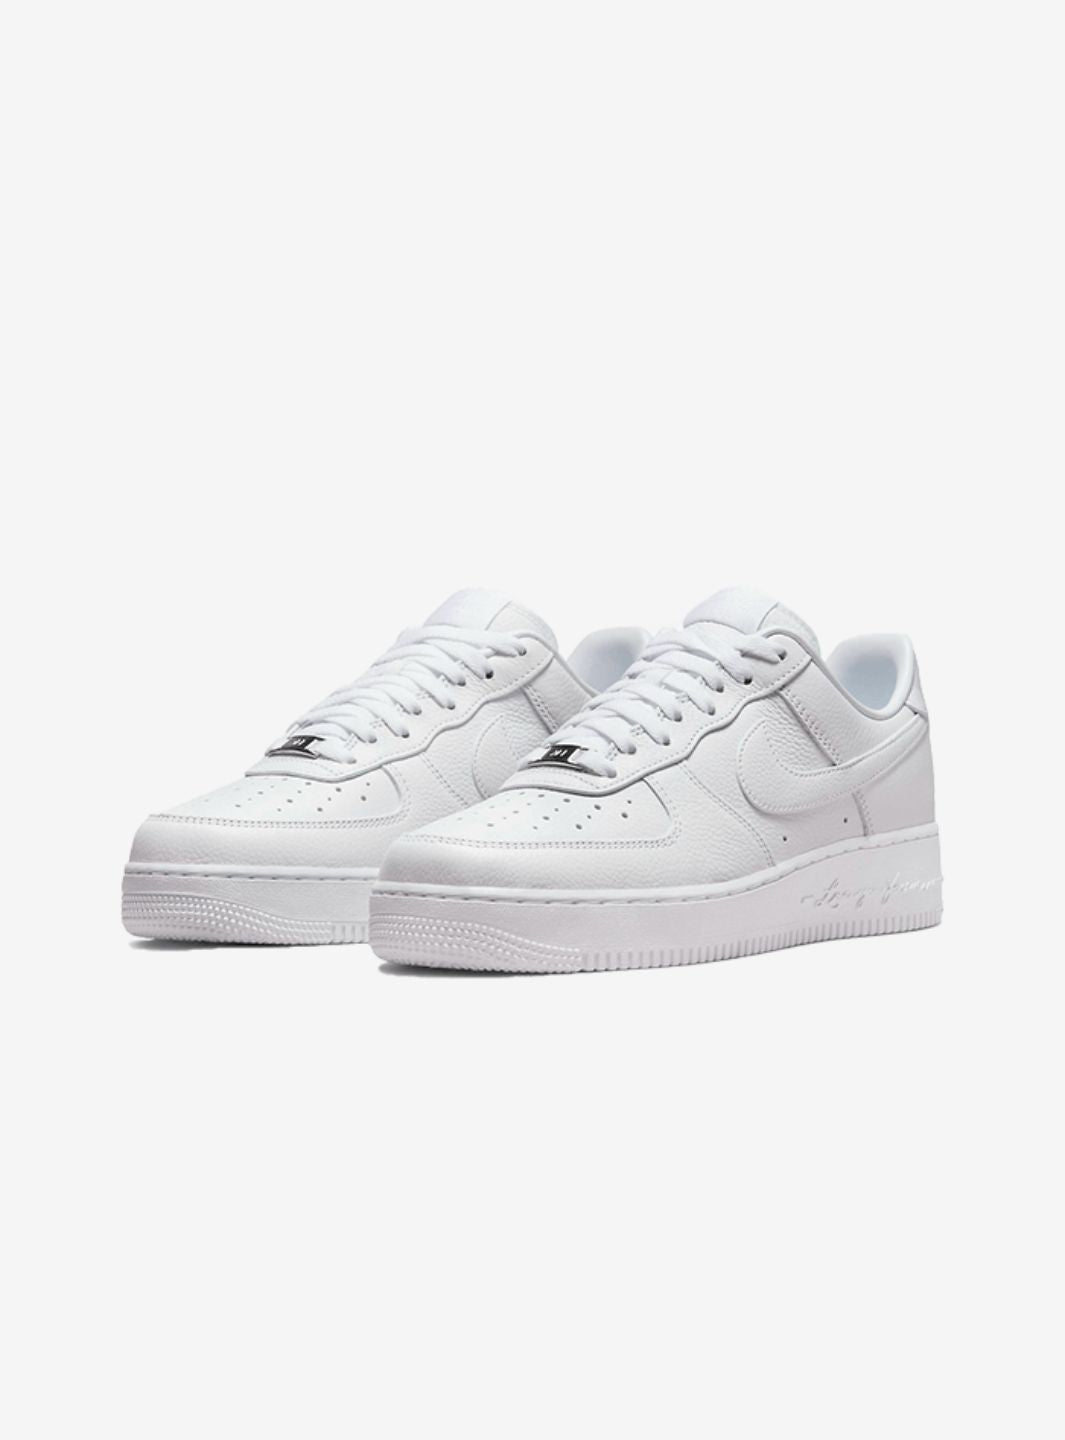 Nike Air Force 1 Low NOCTA Drake Certified Lover Boy - CZ8065-100 | ResellZone